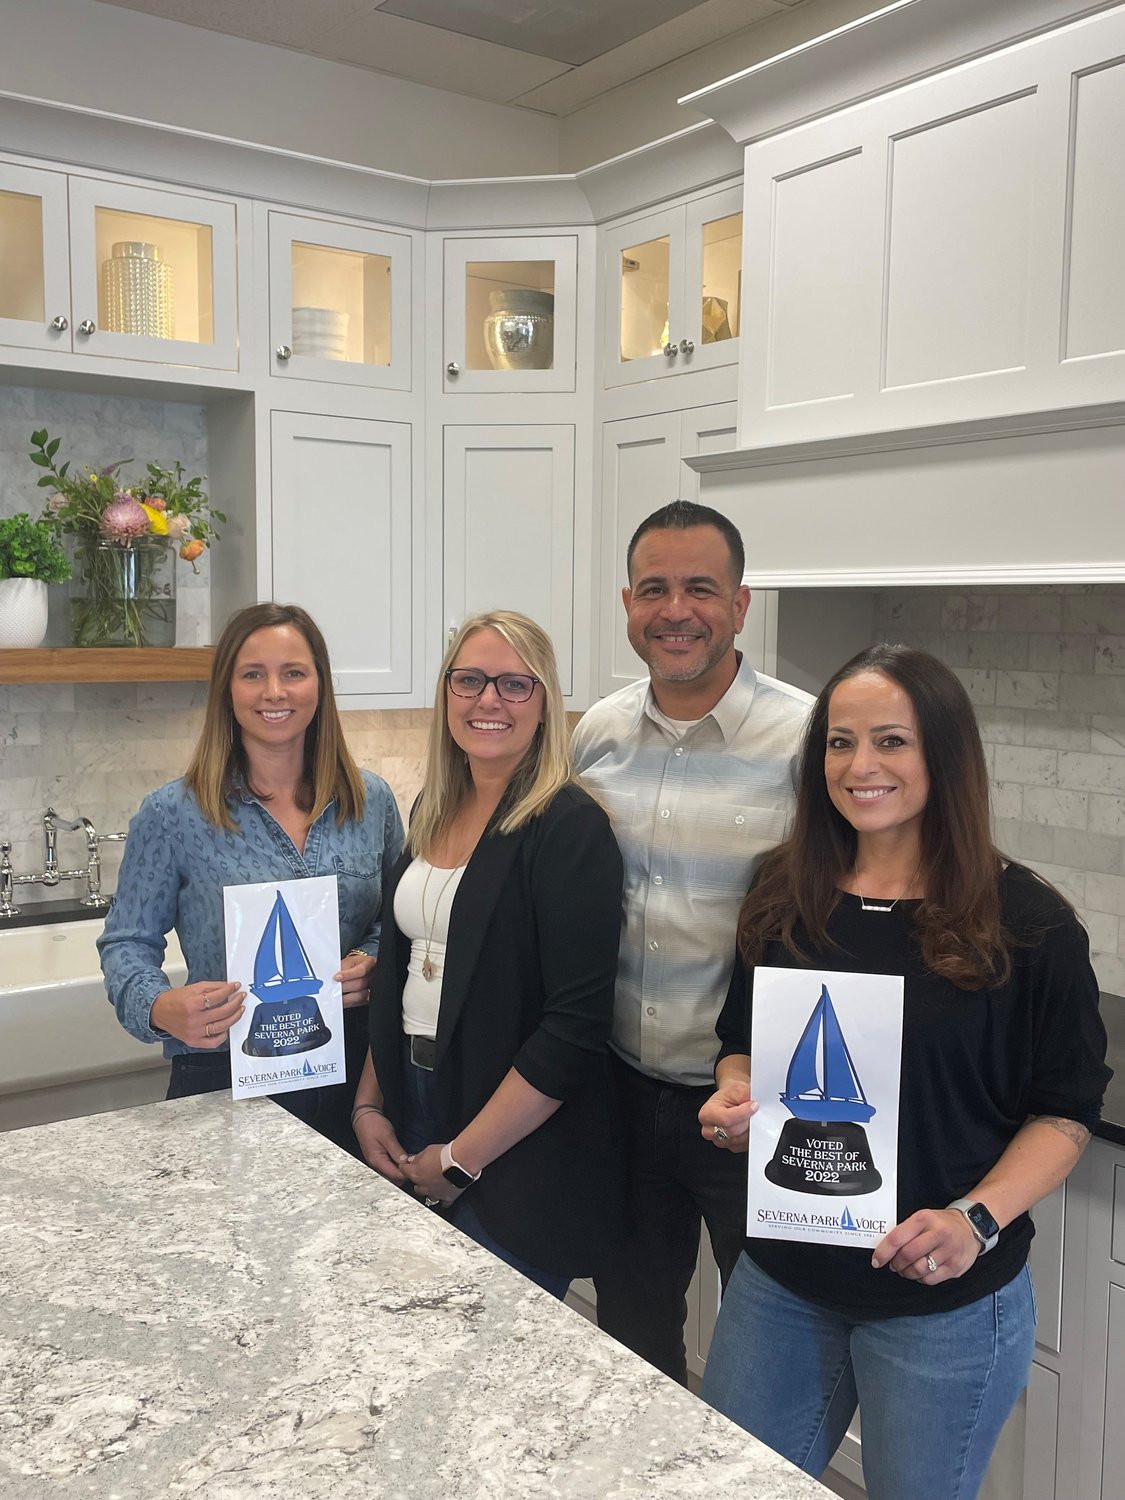 The Severna Park Kitchen & Bath team of Kristy Wallace, Jennifer Chavis, Clayton Chavis and Stephanie Clevenger proudly accepted the awards for Best Kitchen/Bath Remodeling Service and Best Interior Designer.